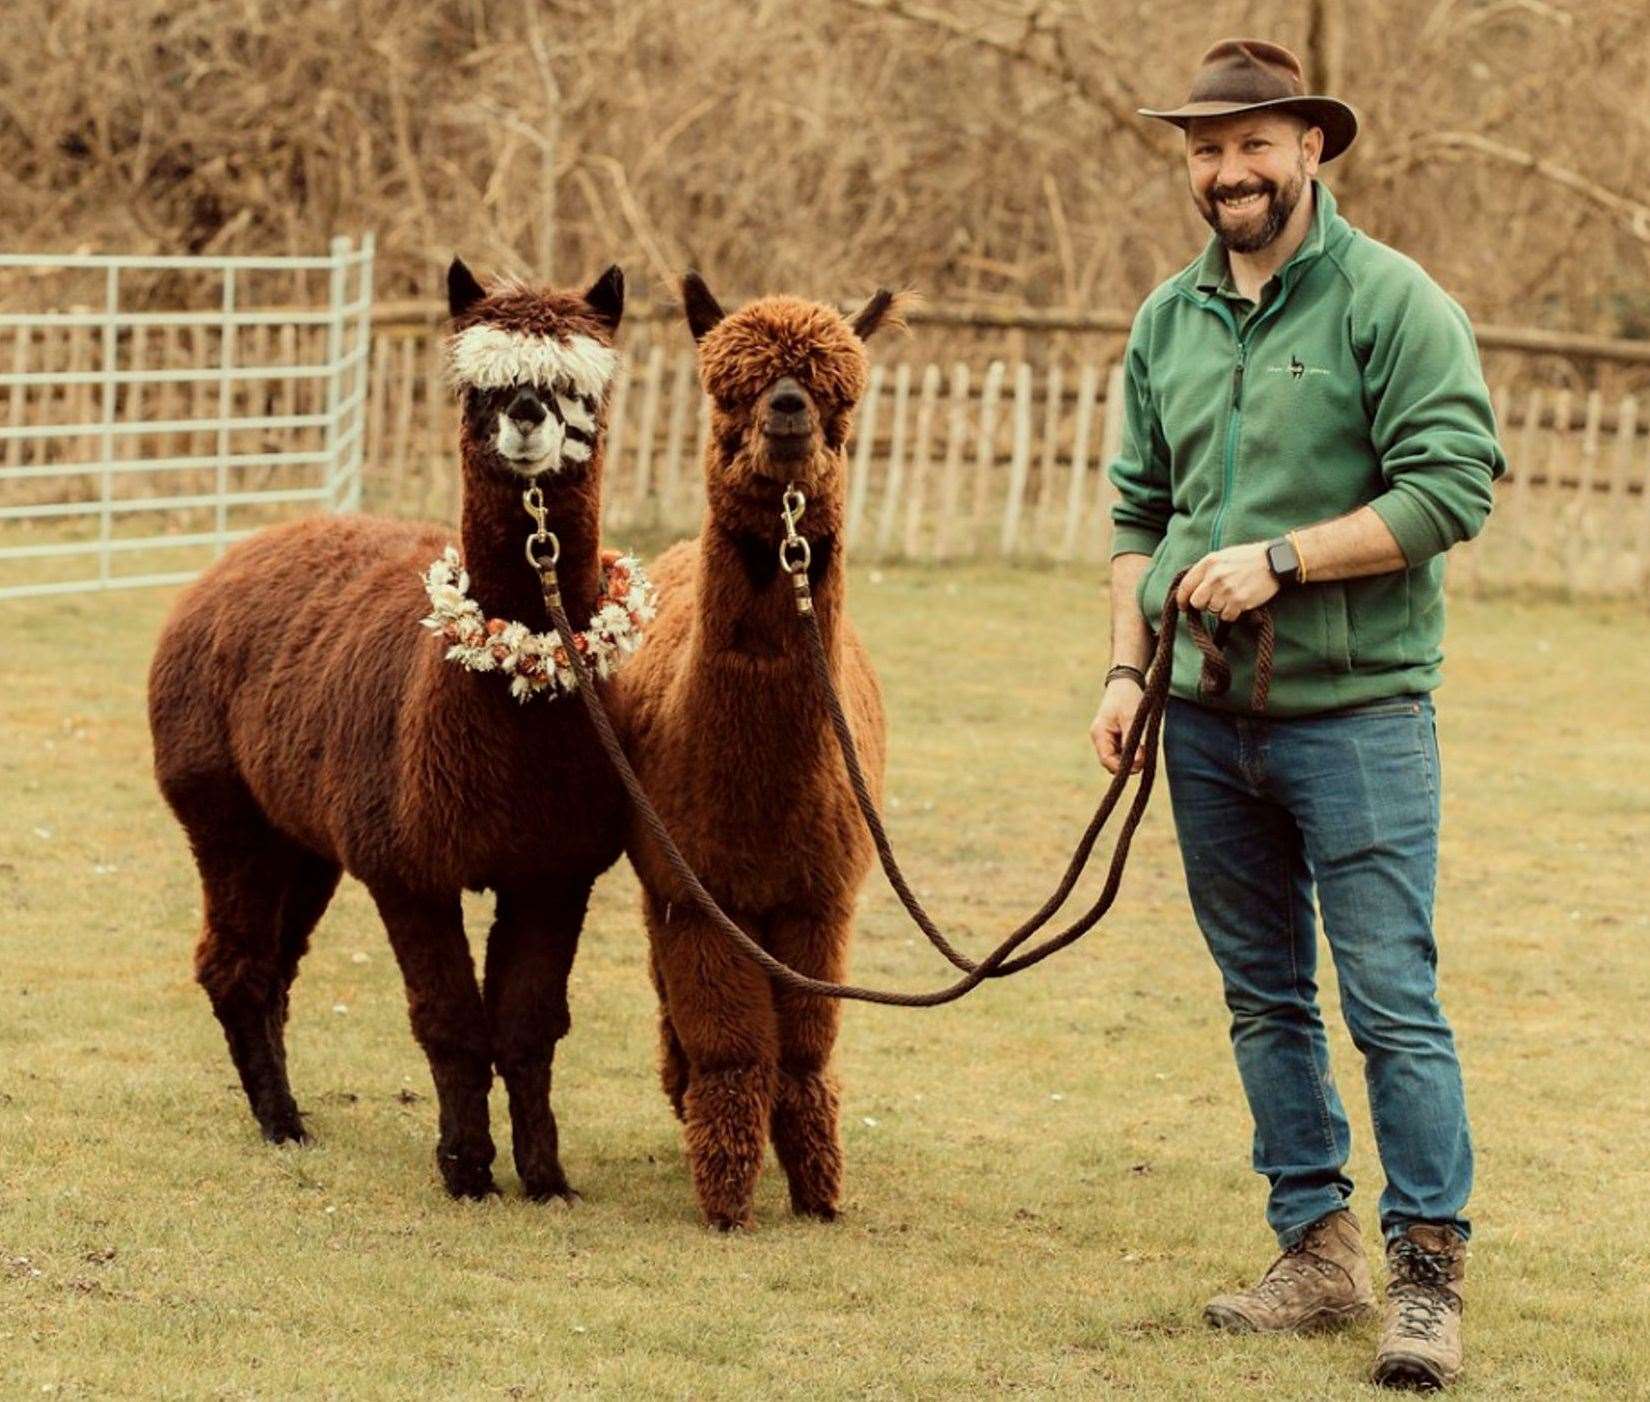 The "Alpaca man" will join Dame Kelly Holmes in her charity trek